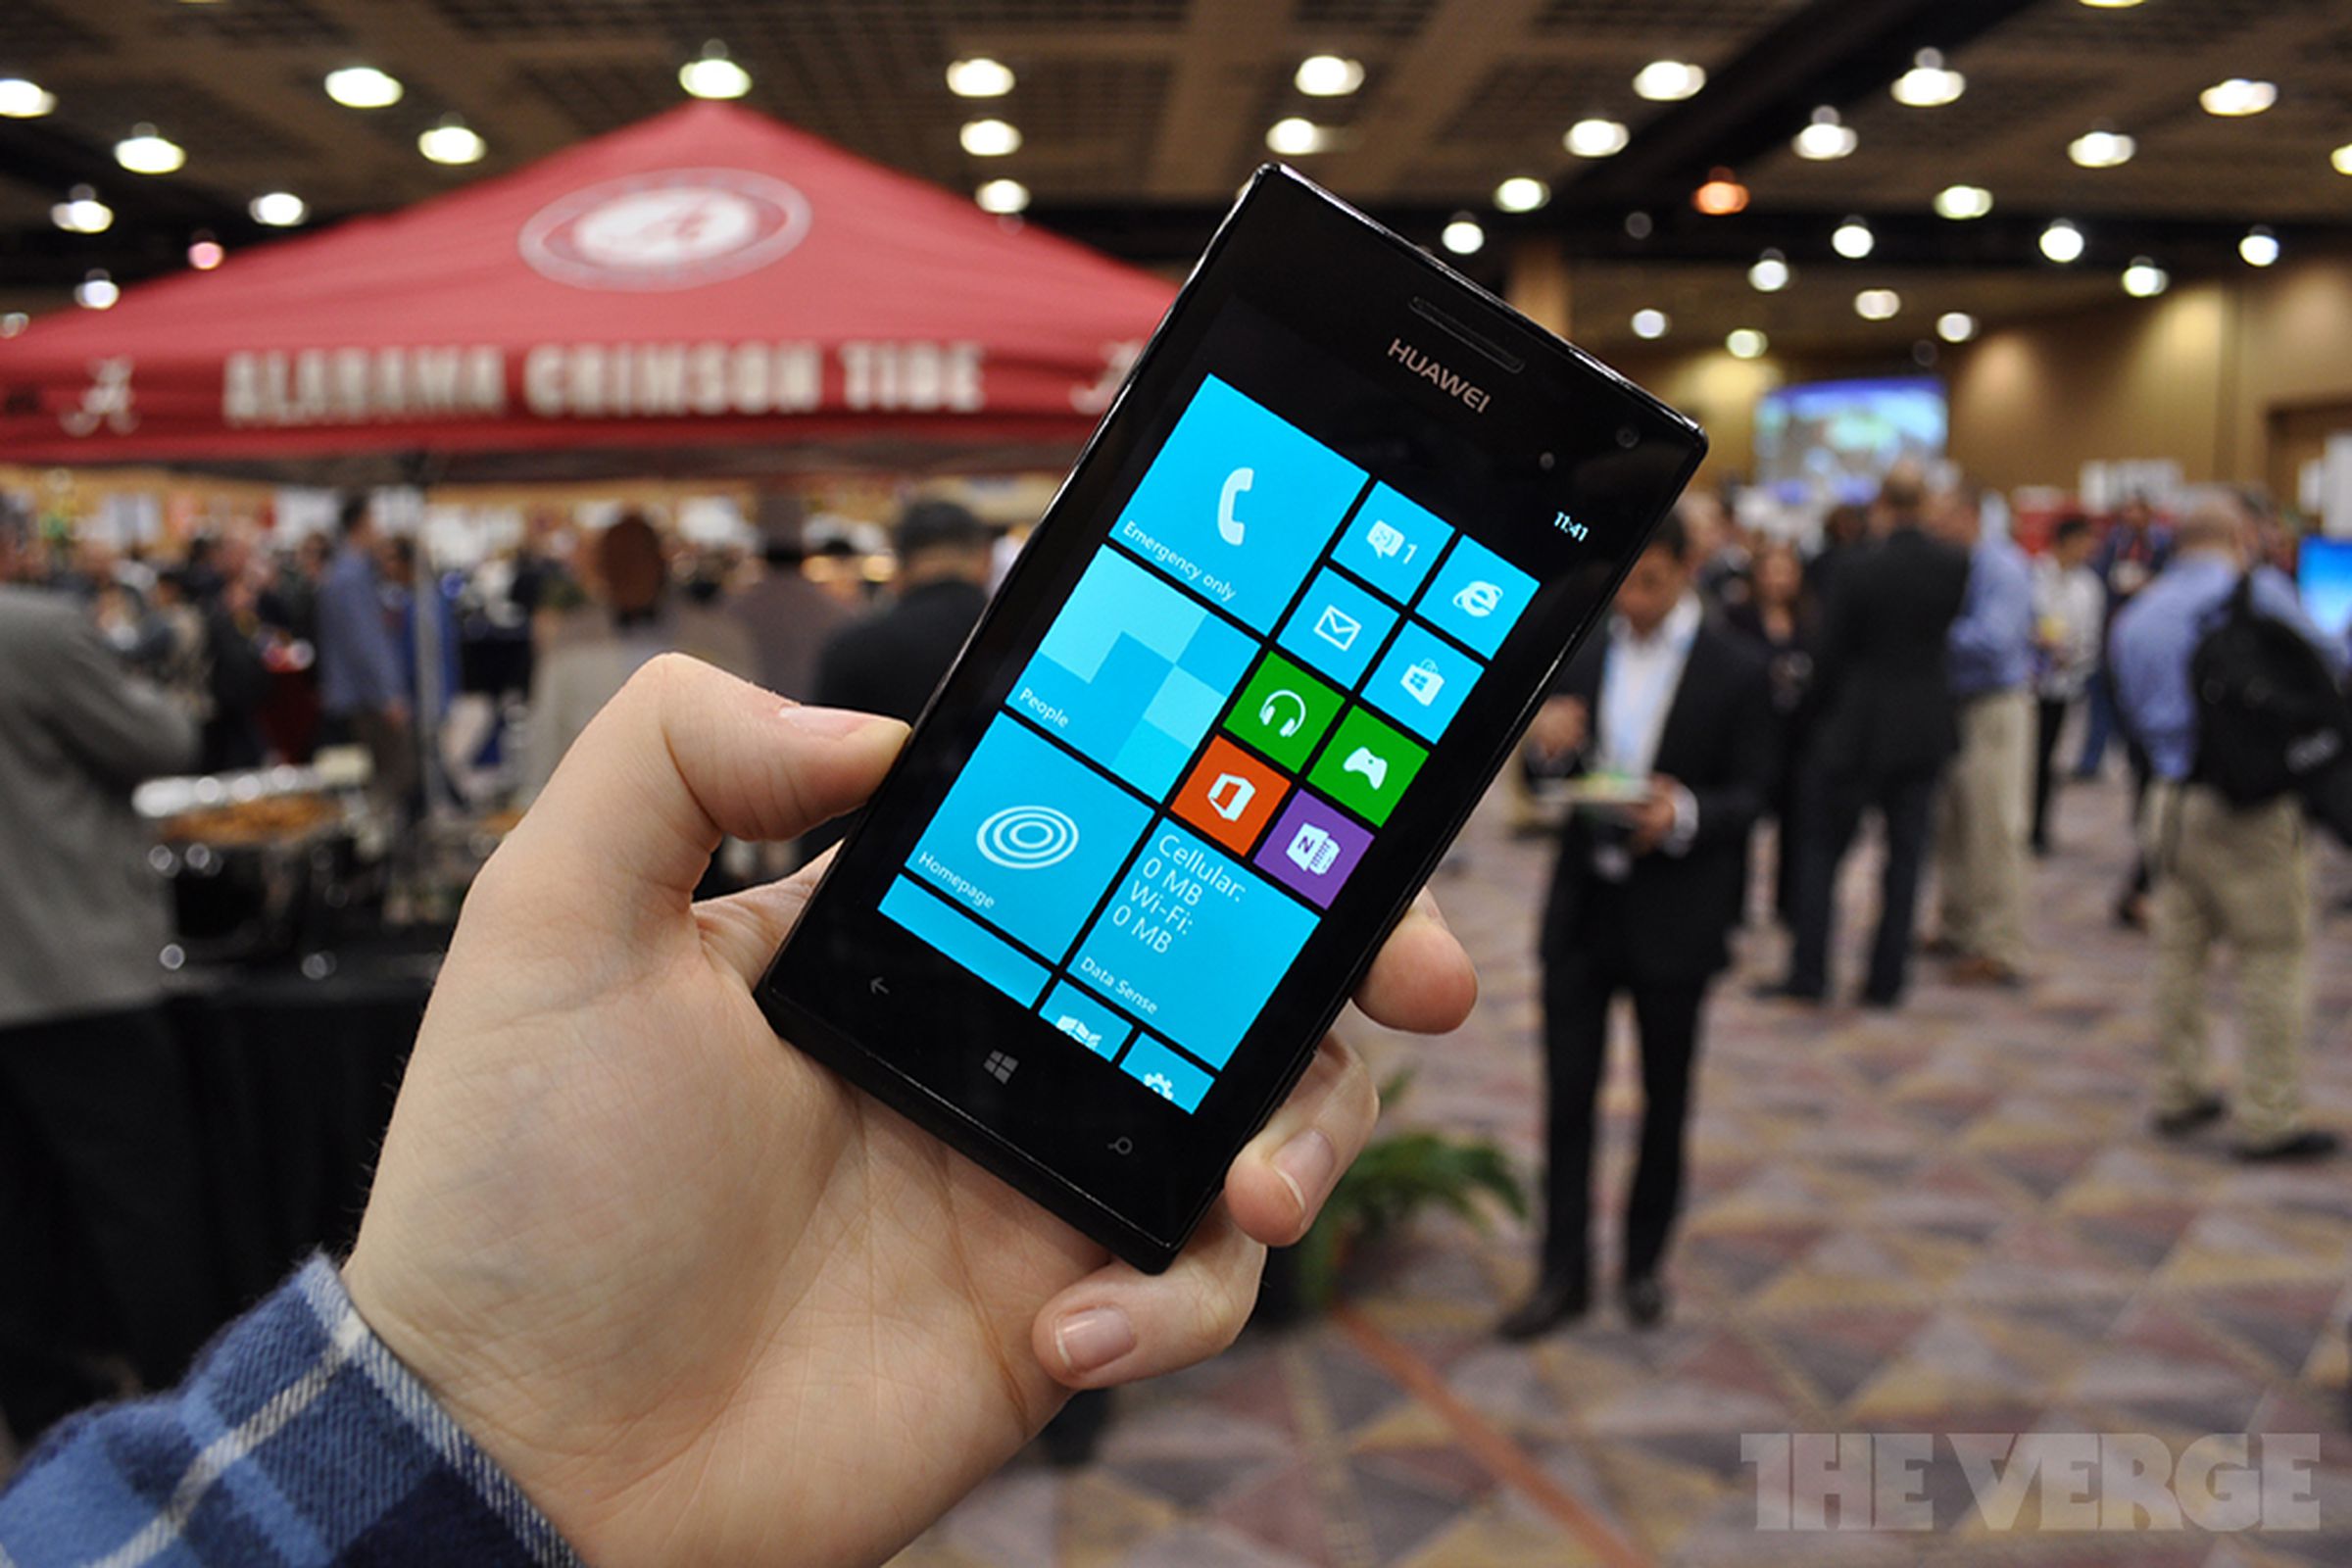 Gallery Photo: Huawei Ascend W1 Windows Phone 8 hands-on pictures